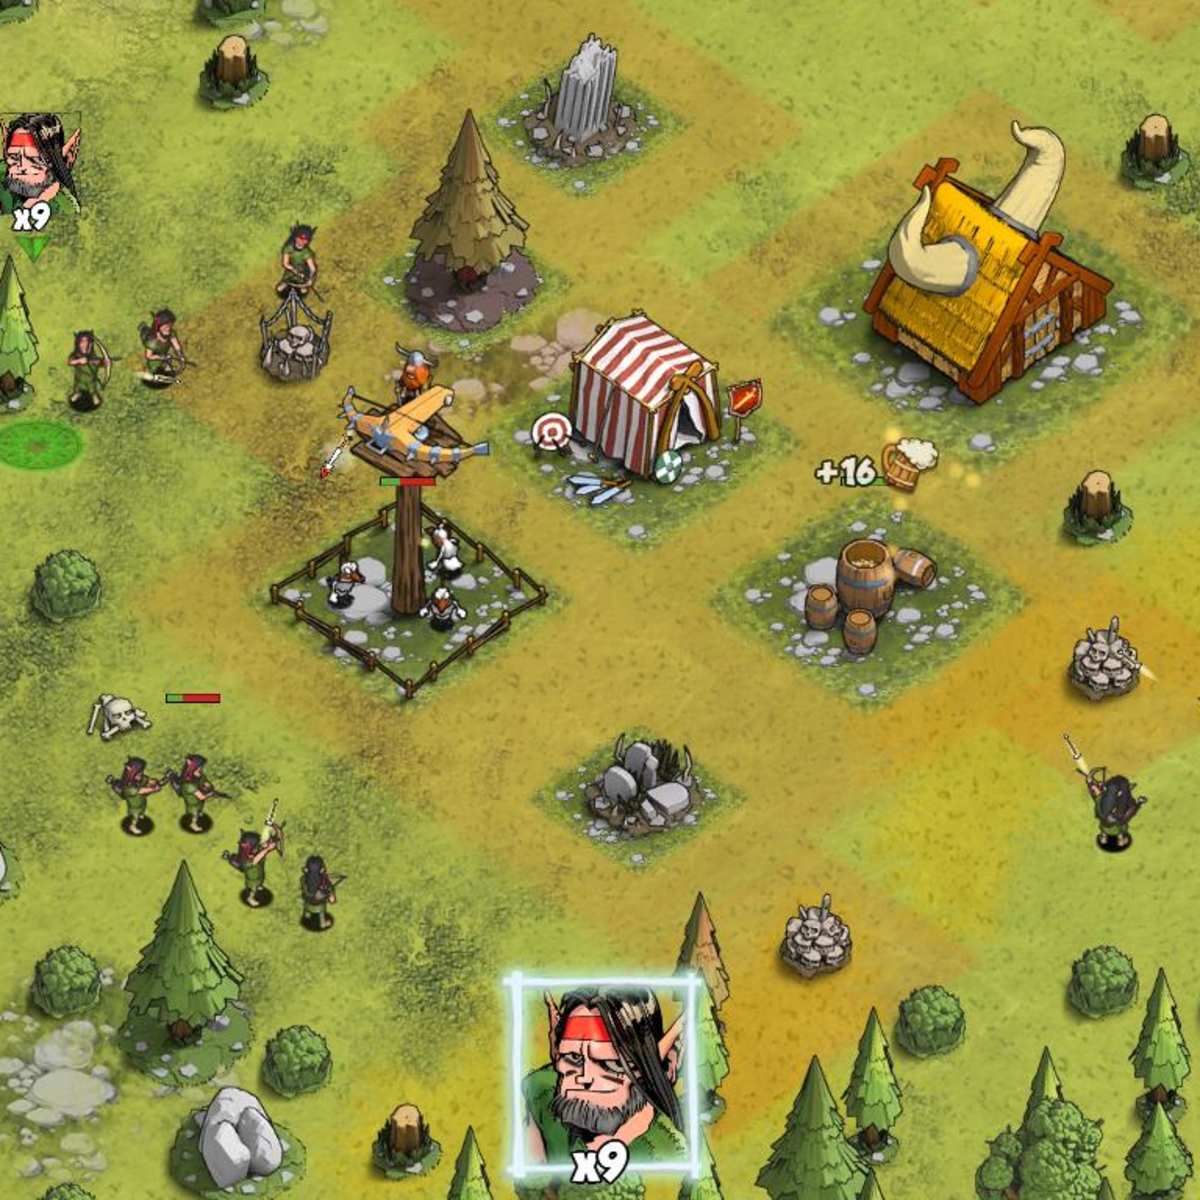 10 Strategy Games Like Clash Of Clans Levelskip